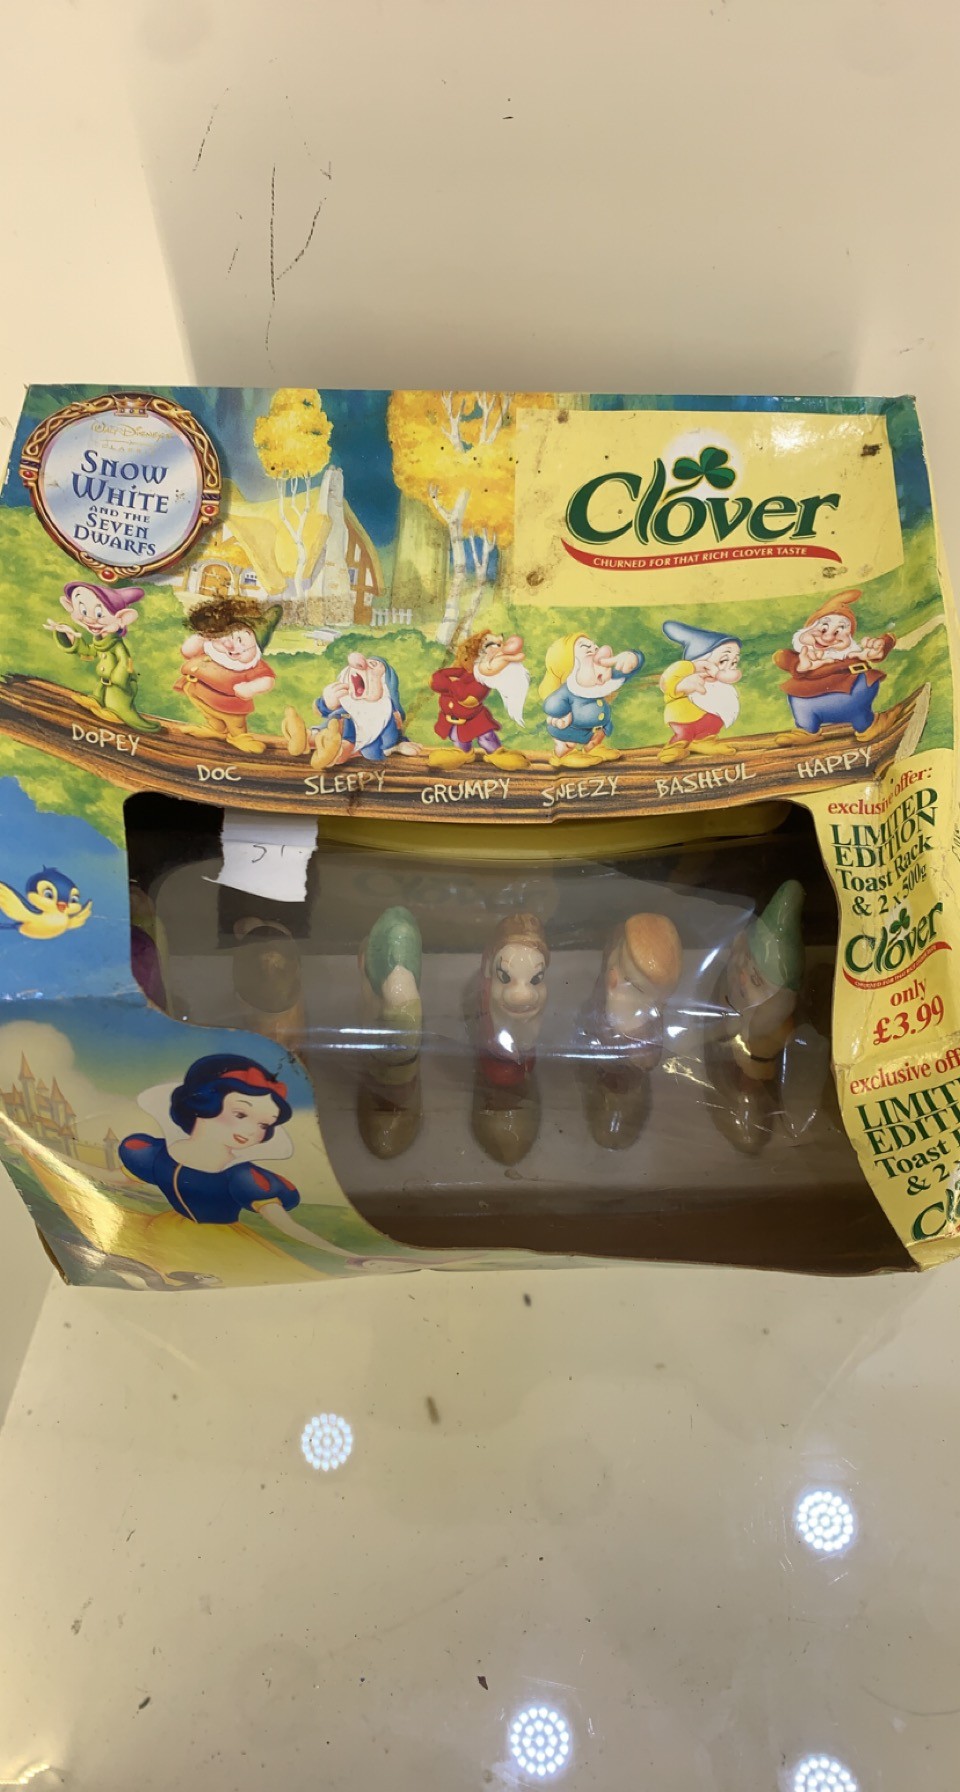 Boxed 7 dwarfs clover toast rack with origional packaging and butter